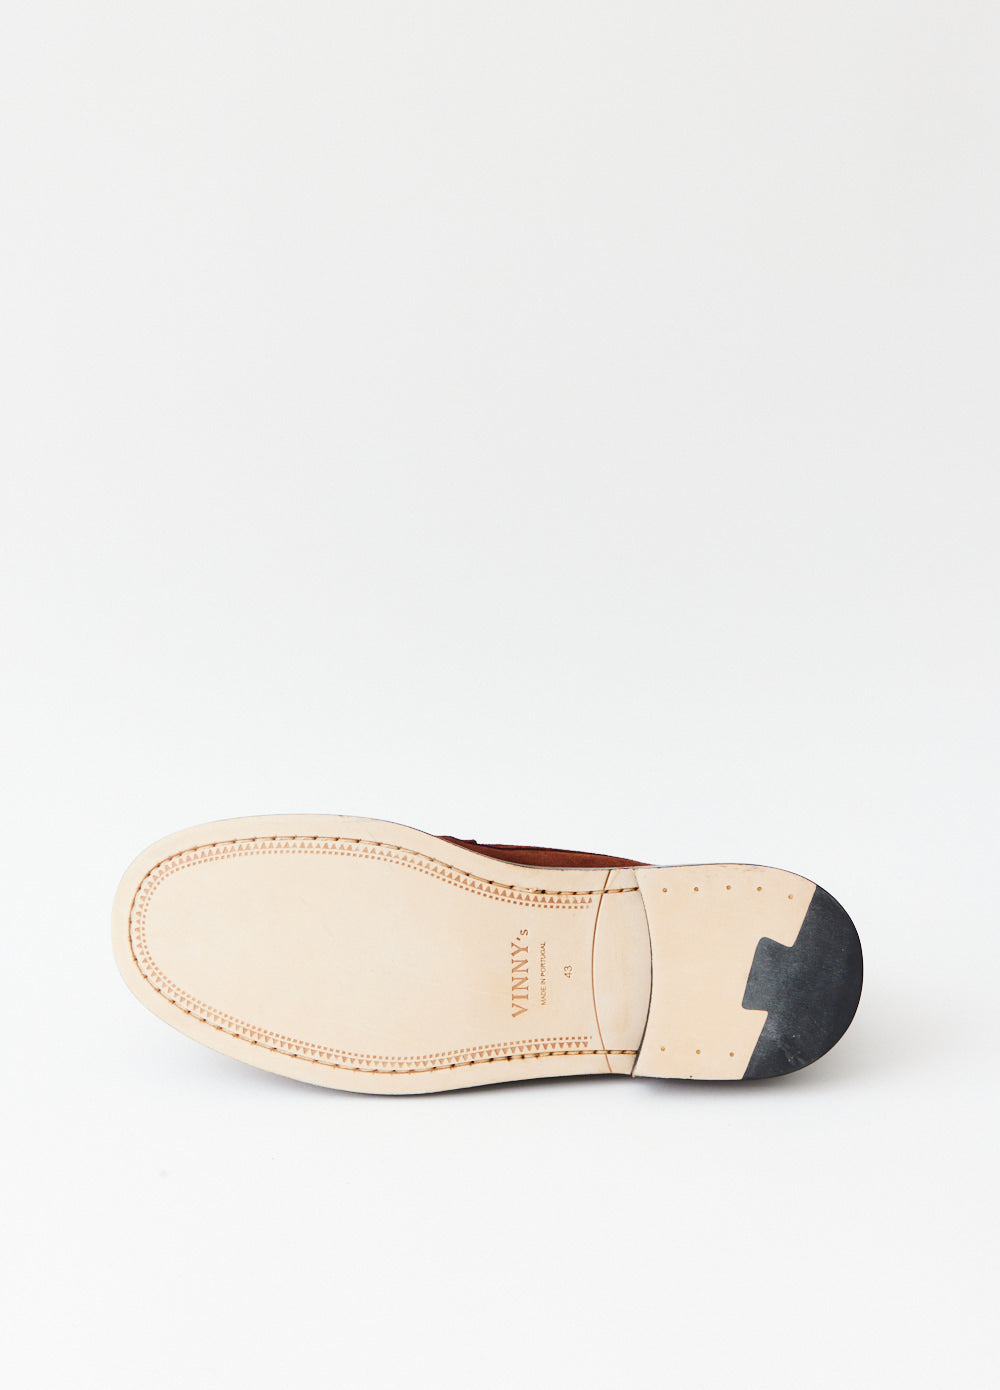 Yardee Moccasin Loafers